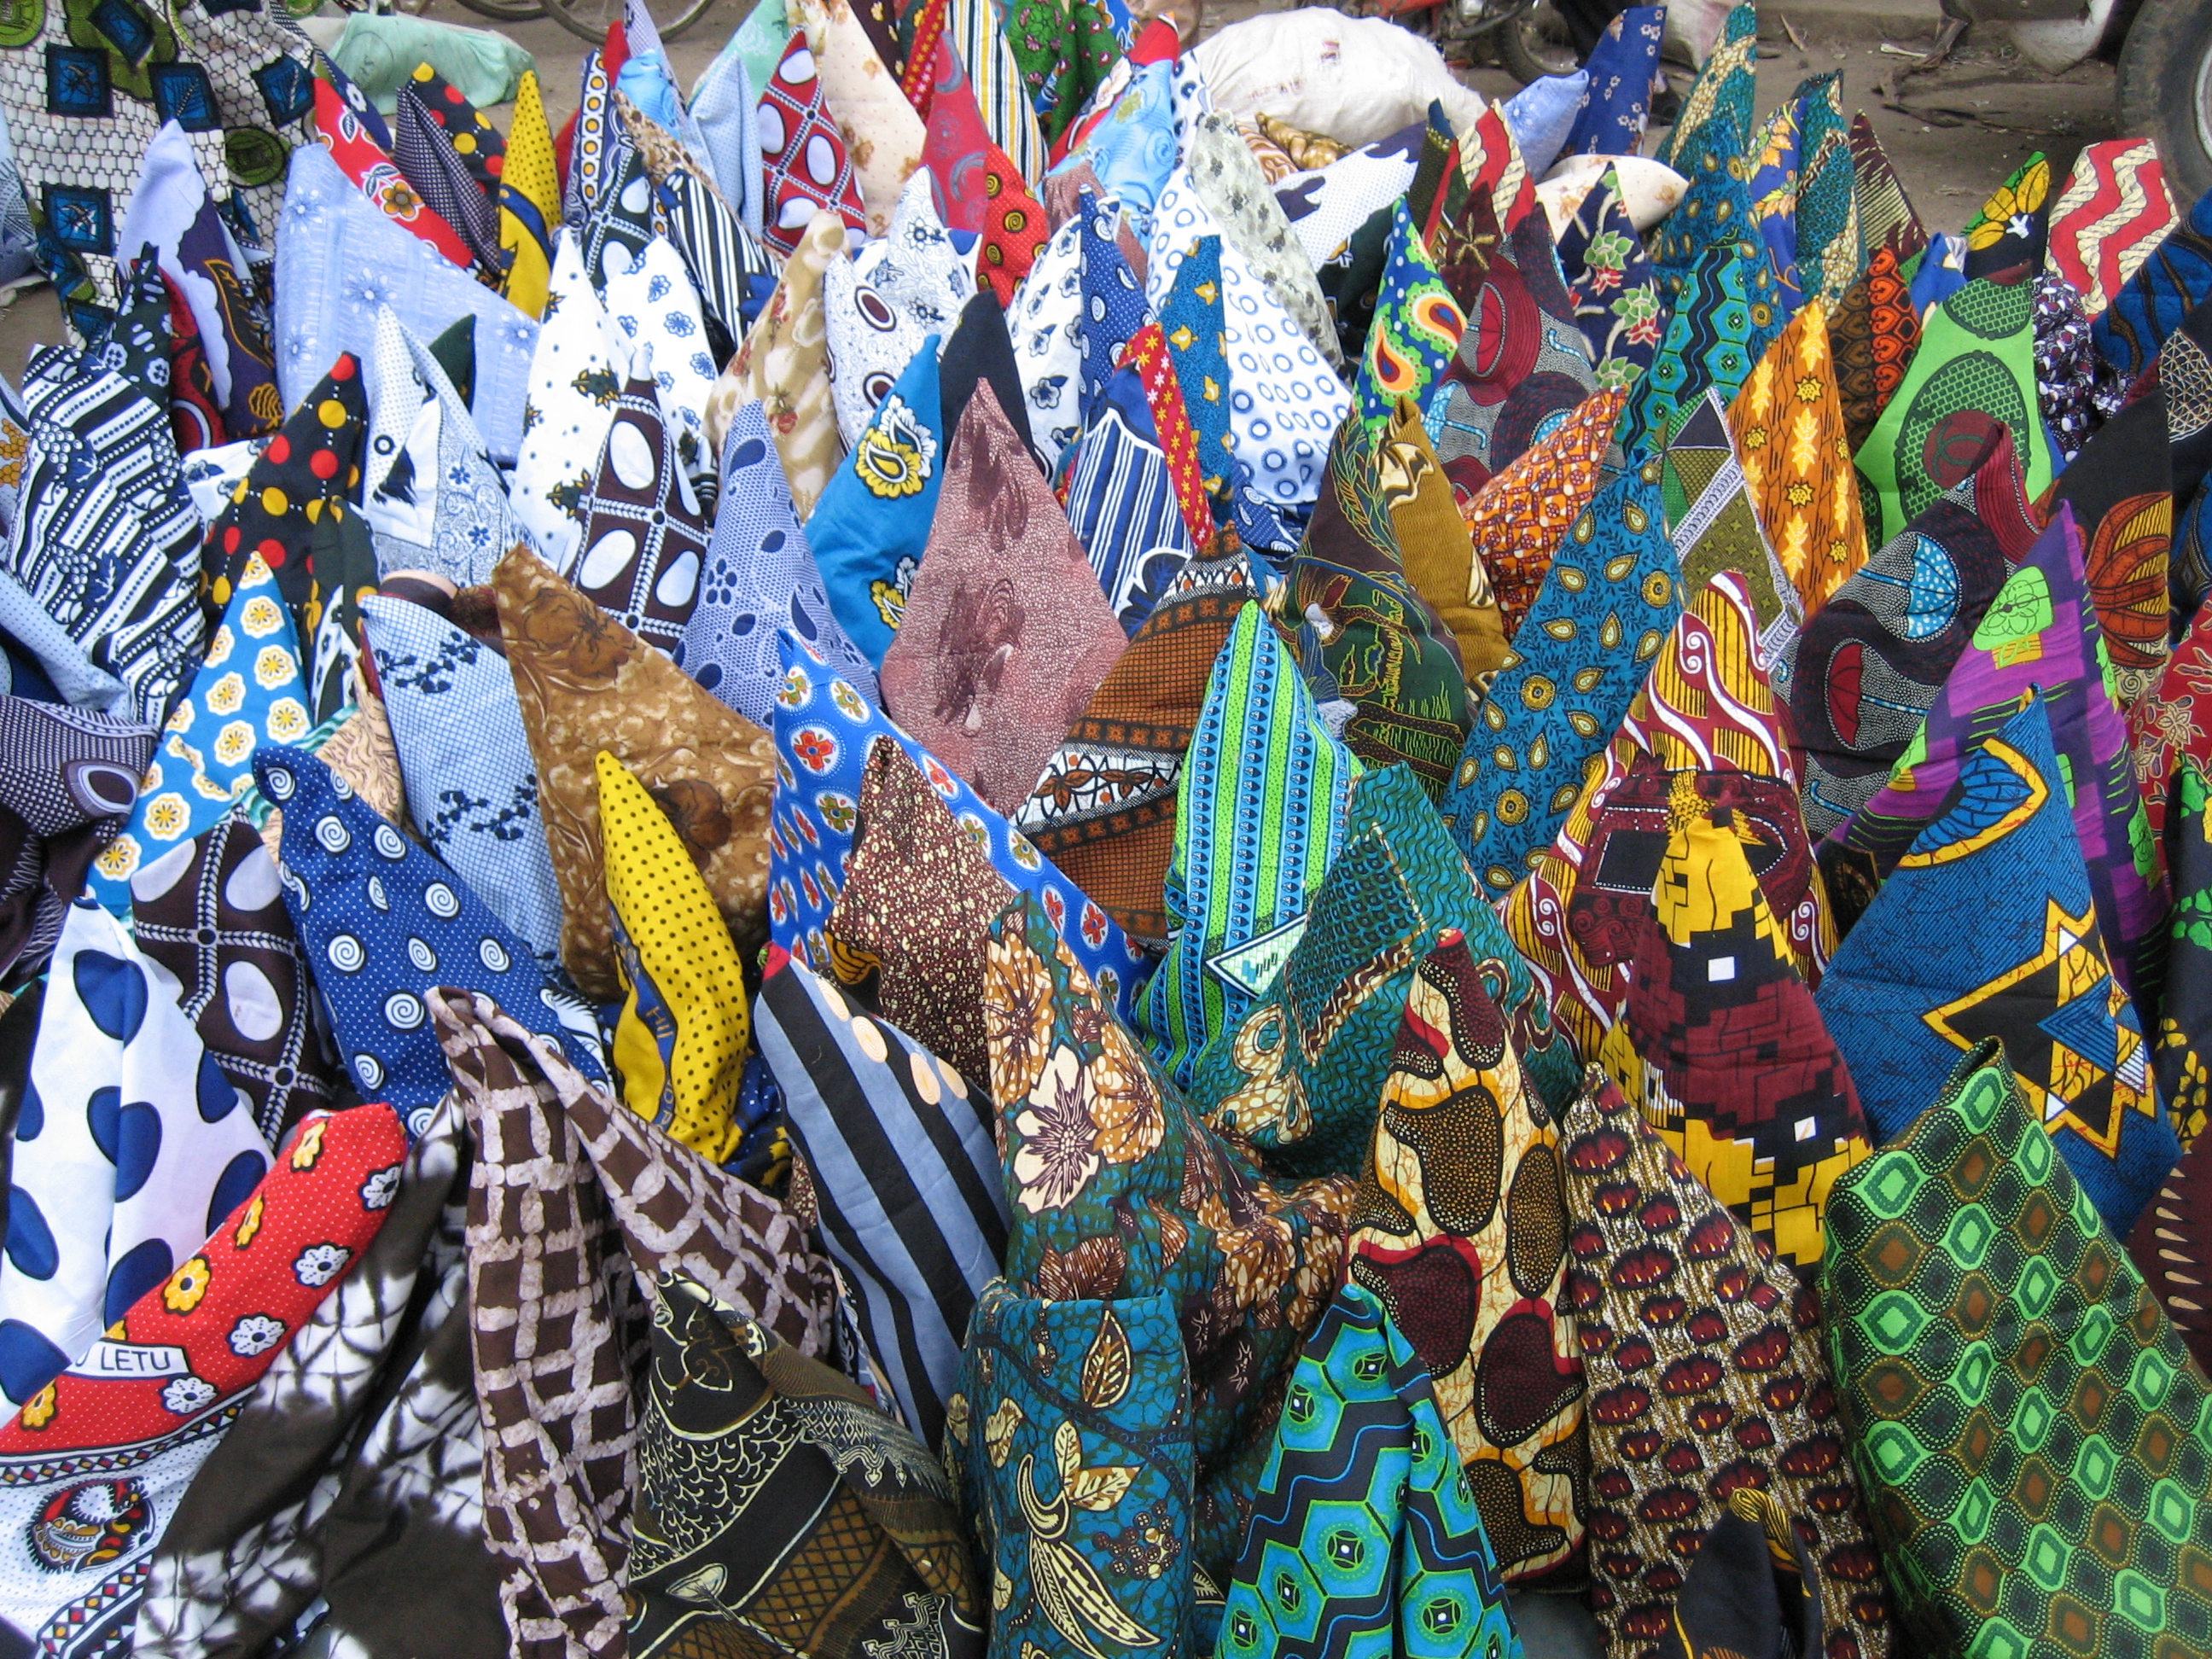 [Quiz] Can you match these African fabrics/materials to their countries of origin?